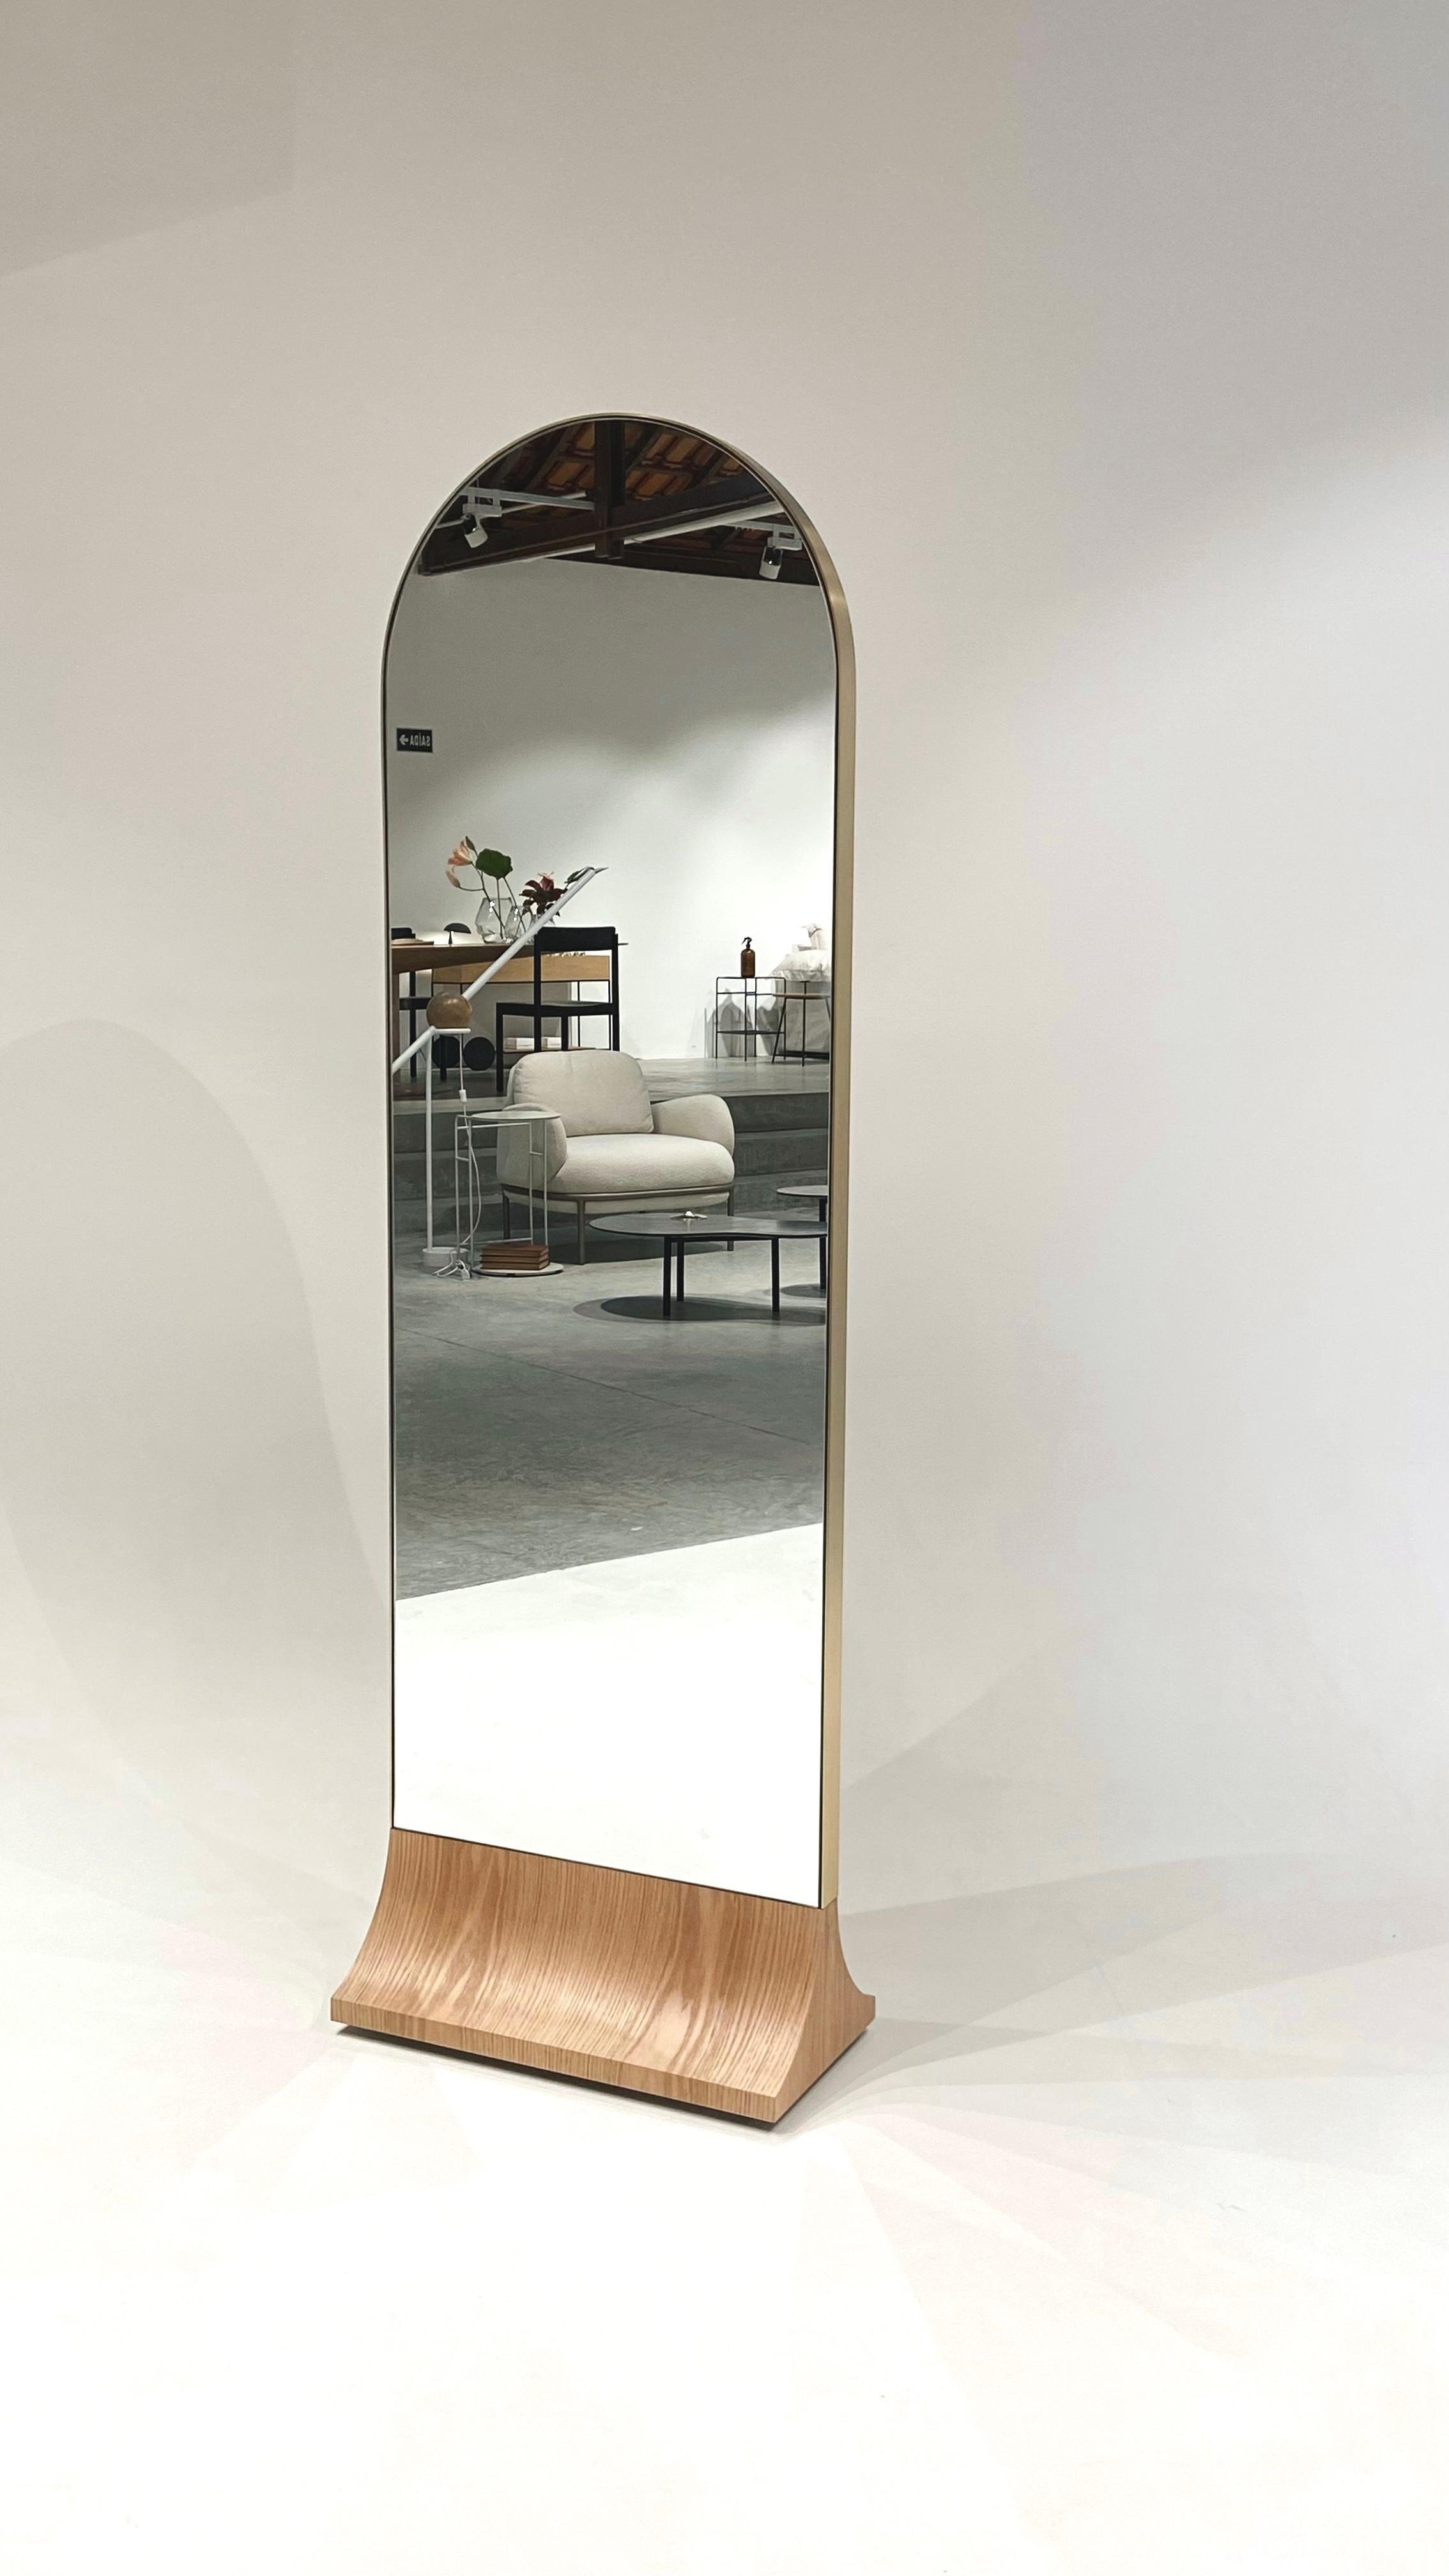 Taiz Floor Mirror was designed having mobility as a premise.
Its self-supporting feature with built-in casters allows for easy mobility and flexibility in everyday use, adapting to light and other space conditions. 

By seamlessly integrating